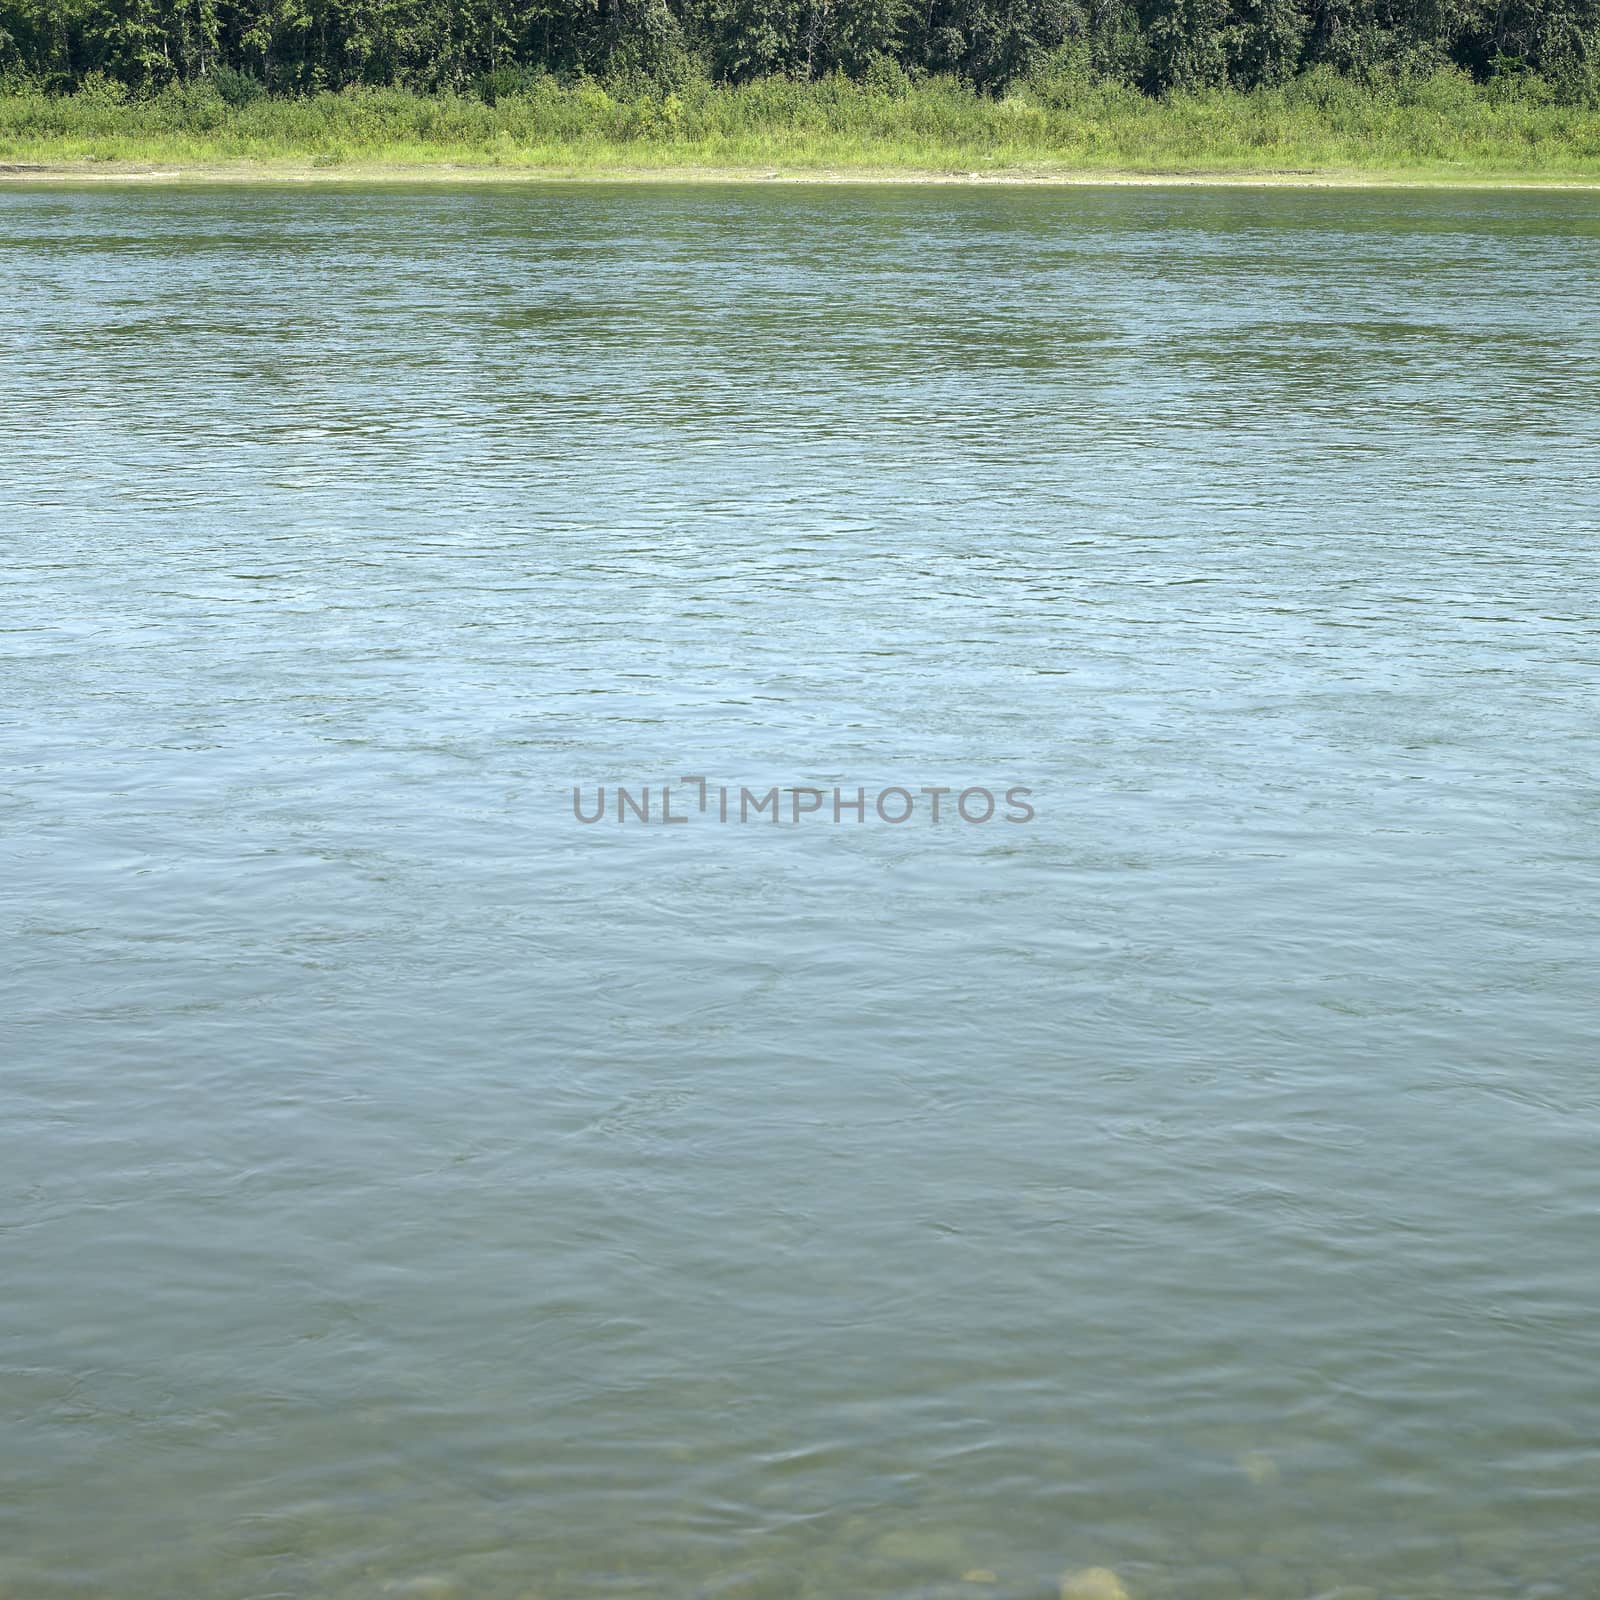 Edge of a calm body of water lined with foliage